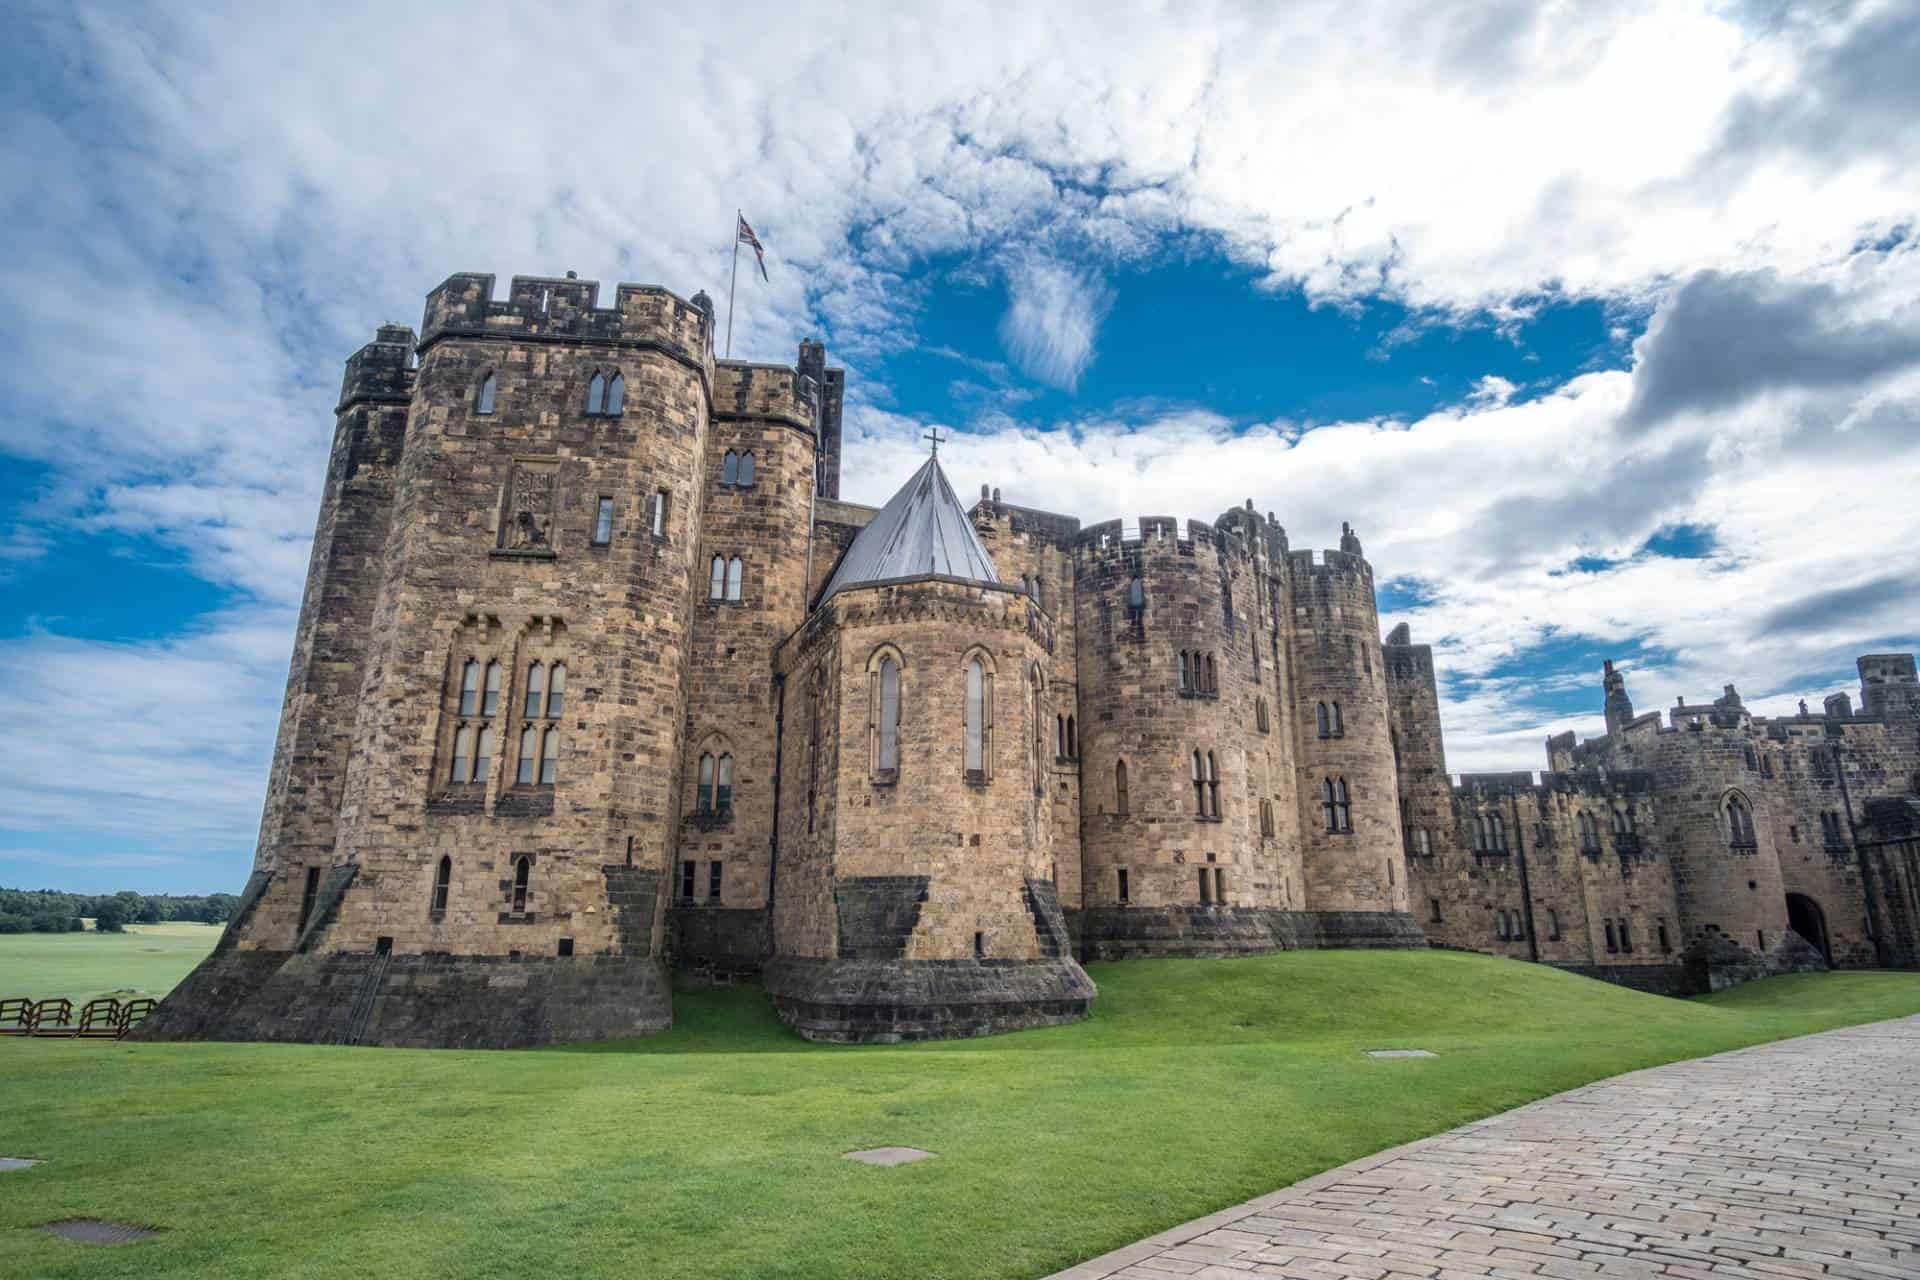 Alnwick Castle, in the English county of Northumberland, starred as the magical Hogwarts School of Witchcraft and Wizardry in the Harry Potter films.